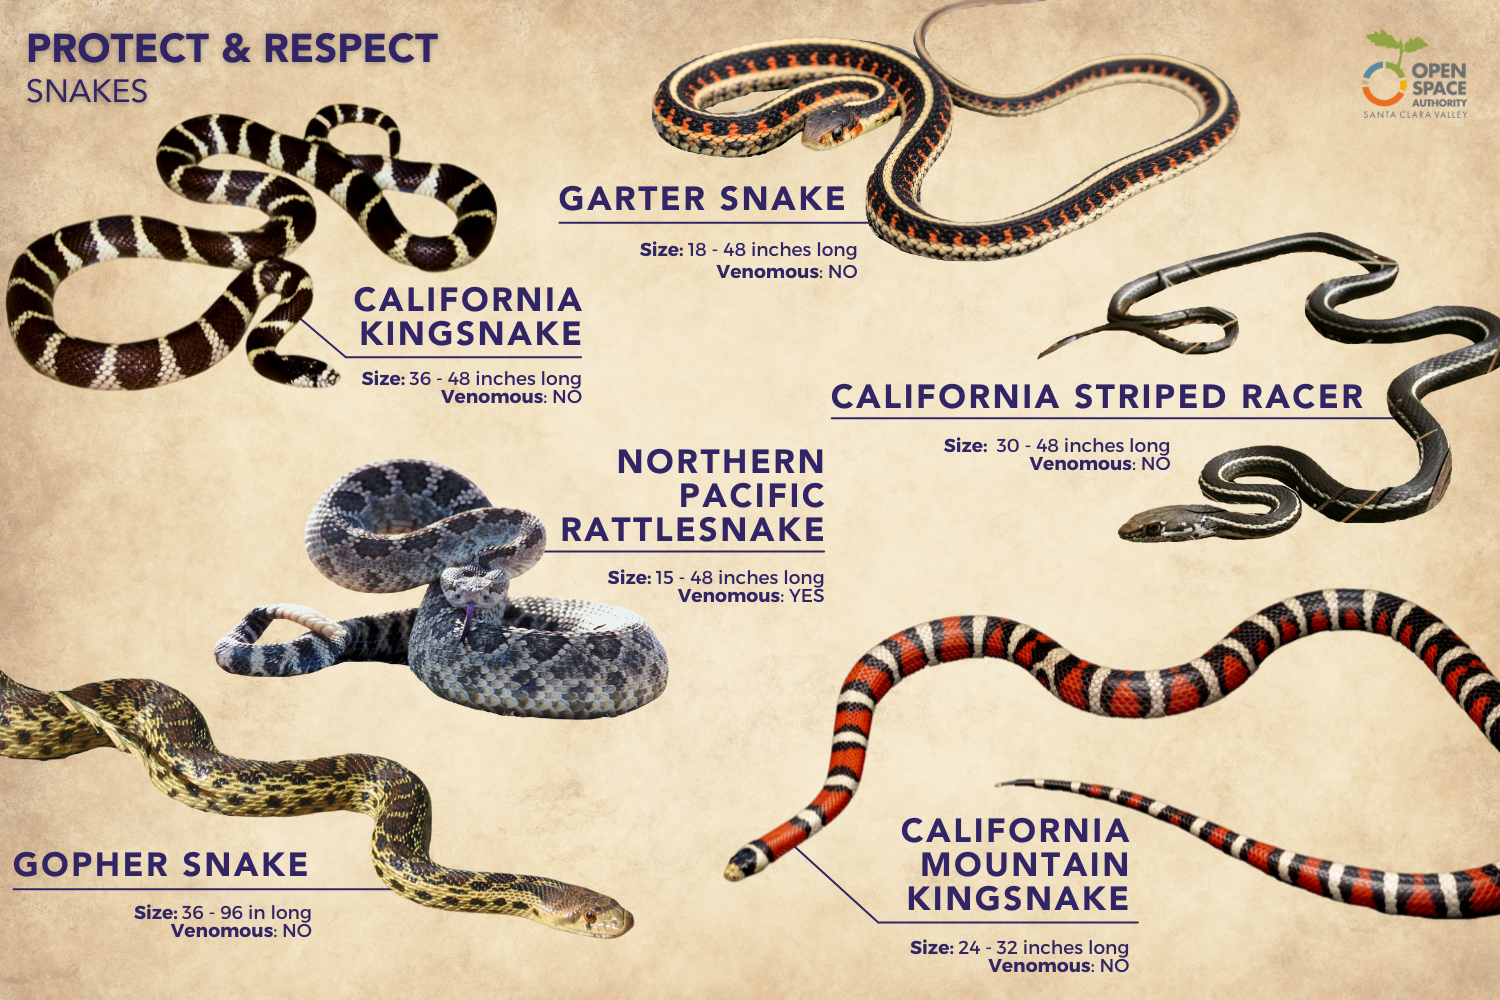 Snake Season: 7 Facts That Will Keep You Safe